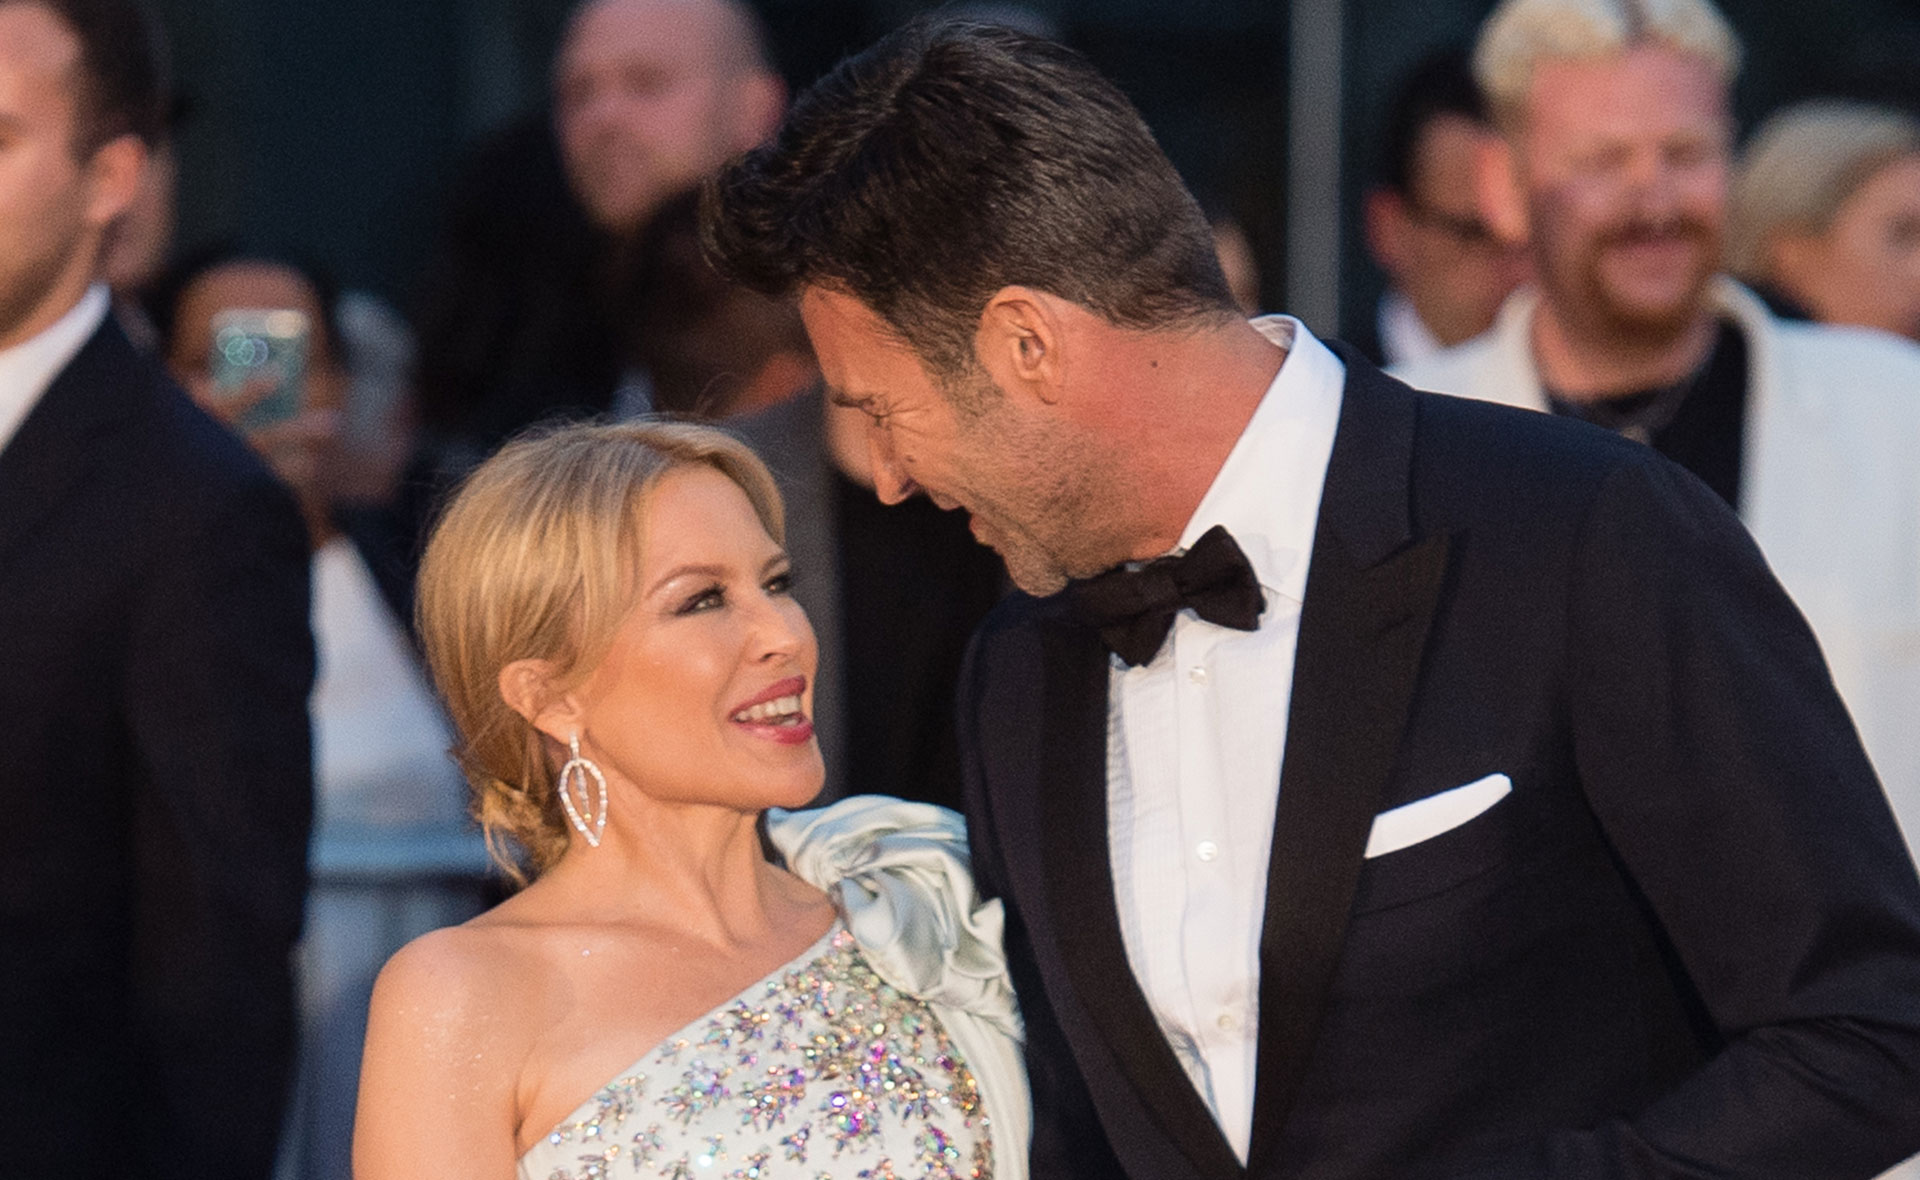 EXCLUSIVE: An Aussie wedding for Kylie Minogue and Paul Solomons